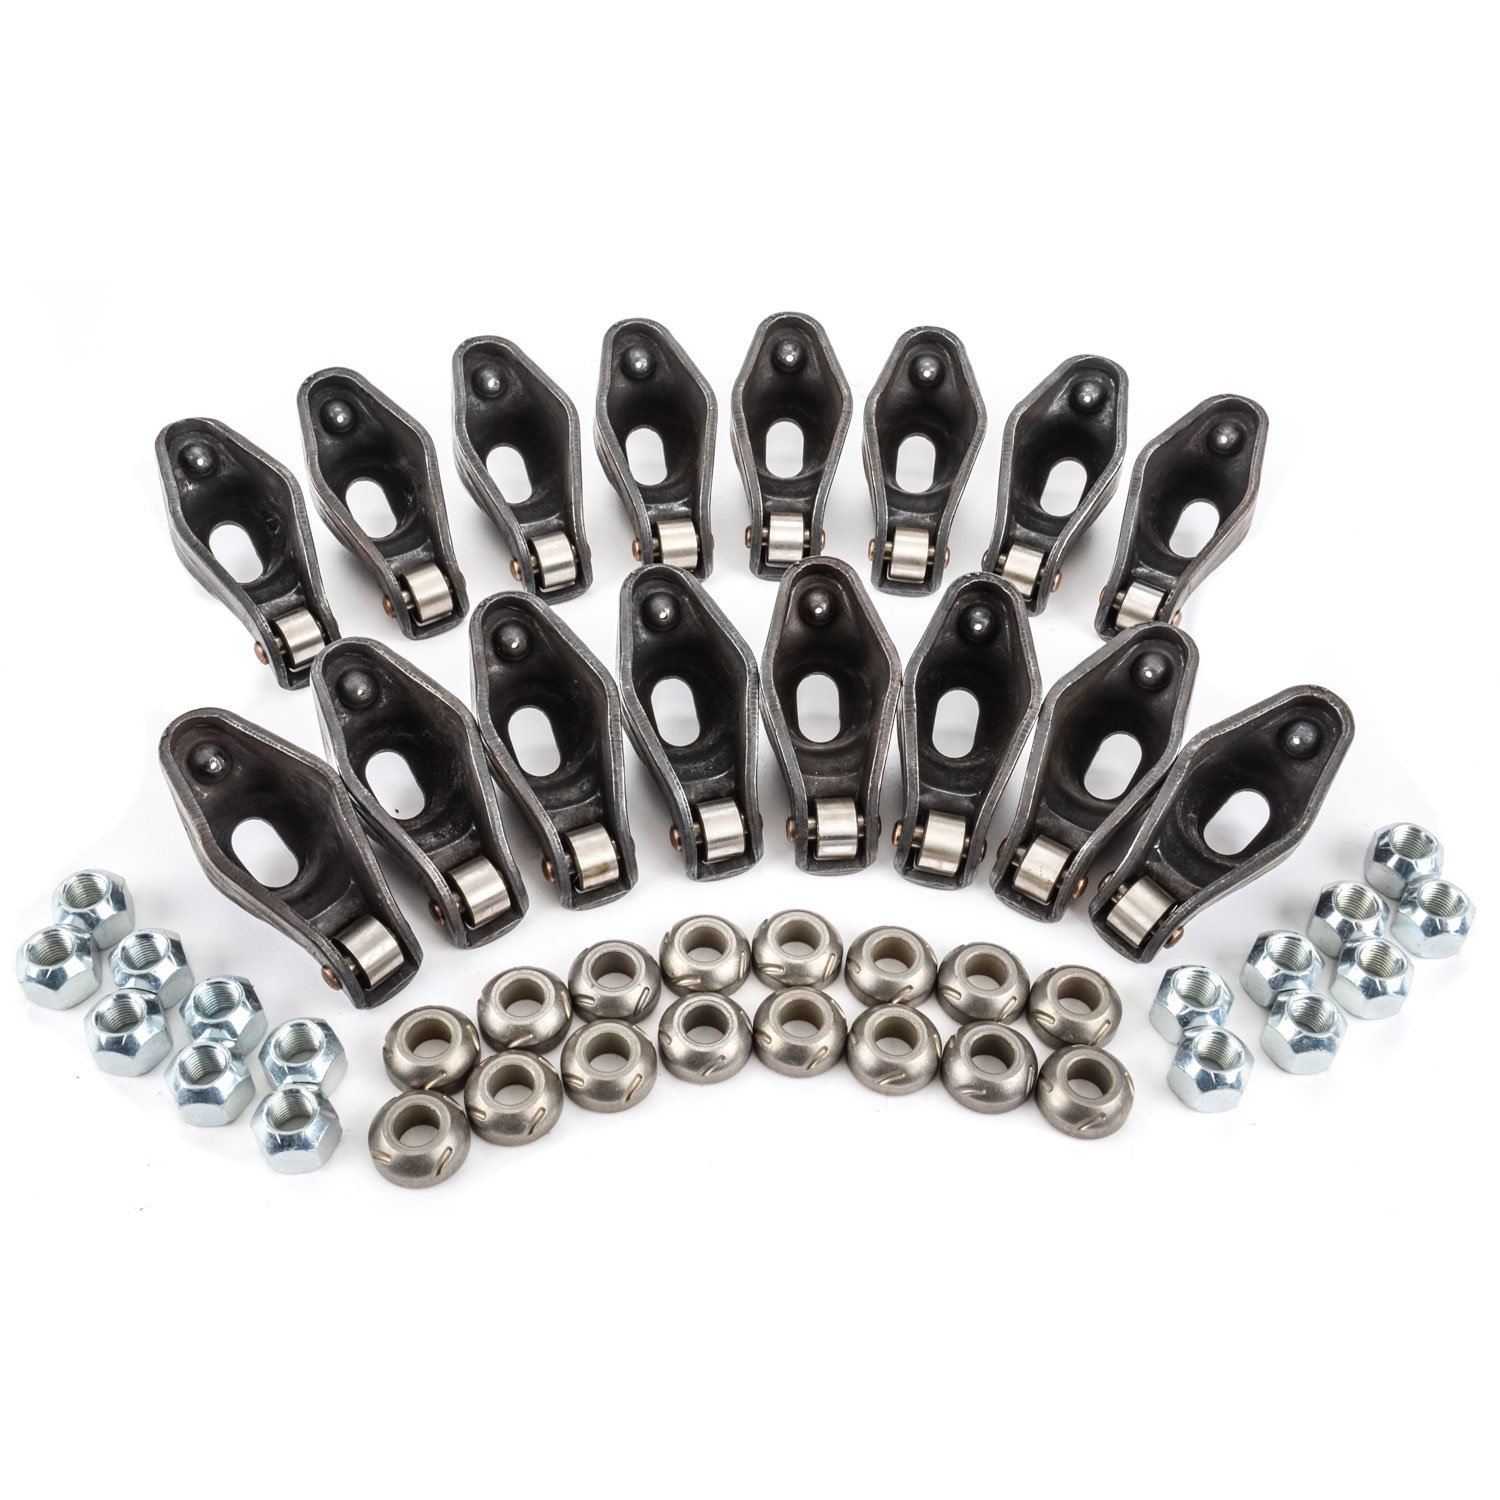 Small Block Chevy Roller-Tip Rocker Arms with 1.6 Ratio & 3/8" Stud